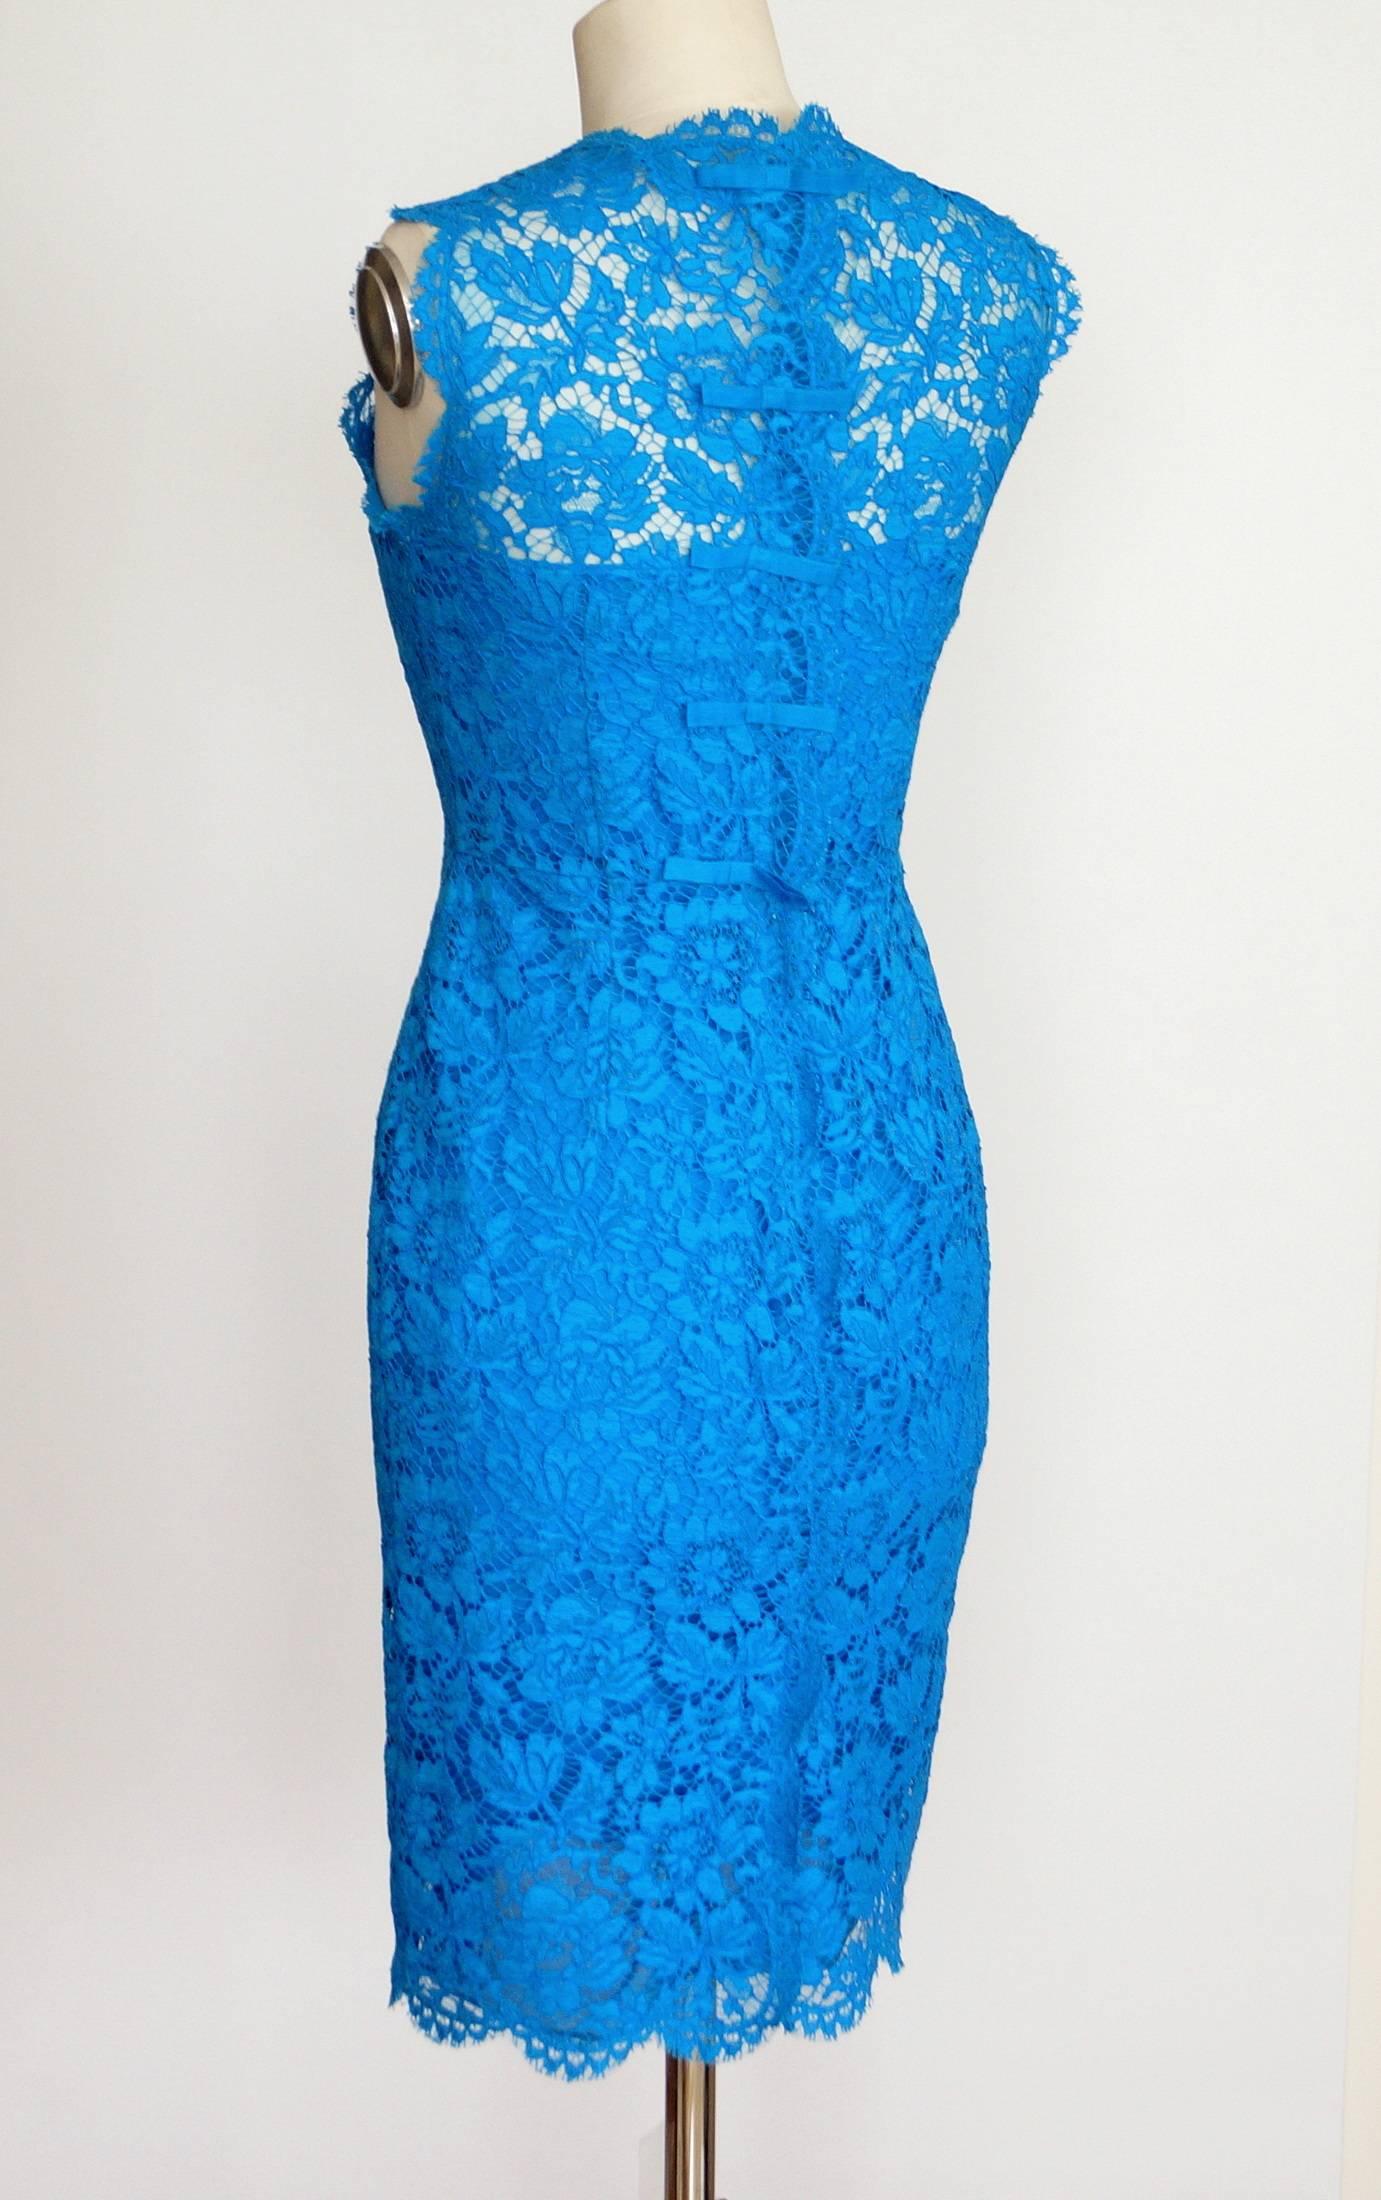 Guaranteed authentic VALENTINO signature lace dress with rear bows. 
Vivid blue lace dress with lovely scalloped edging.
First 2 bows have hidden buttons with the last 3 covering the zipper.
Dress is fully lined.
NEW or NEVER WORN.  Tag